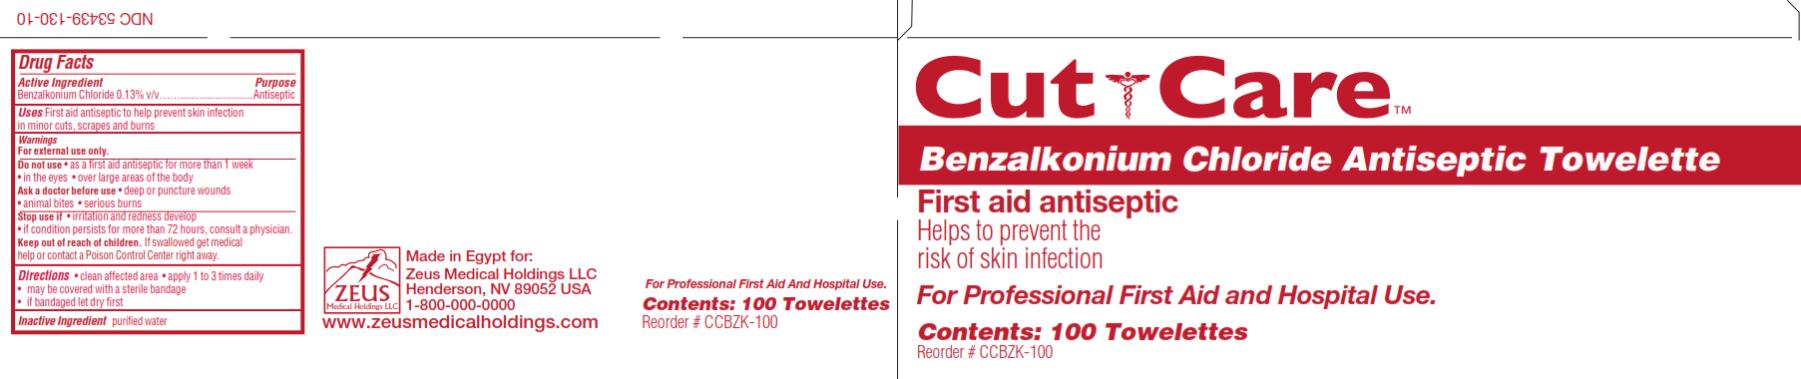 PRINCIPAL DISPLAY PANEL
NDC 53439-130-10
Cut Care
Benzalkonium Chloride Antiseptic Towelette
First aid antiseptic
Contents: 100 Towelettes
